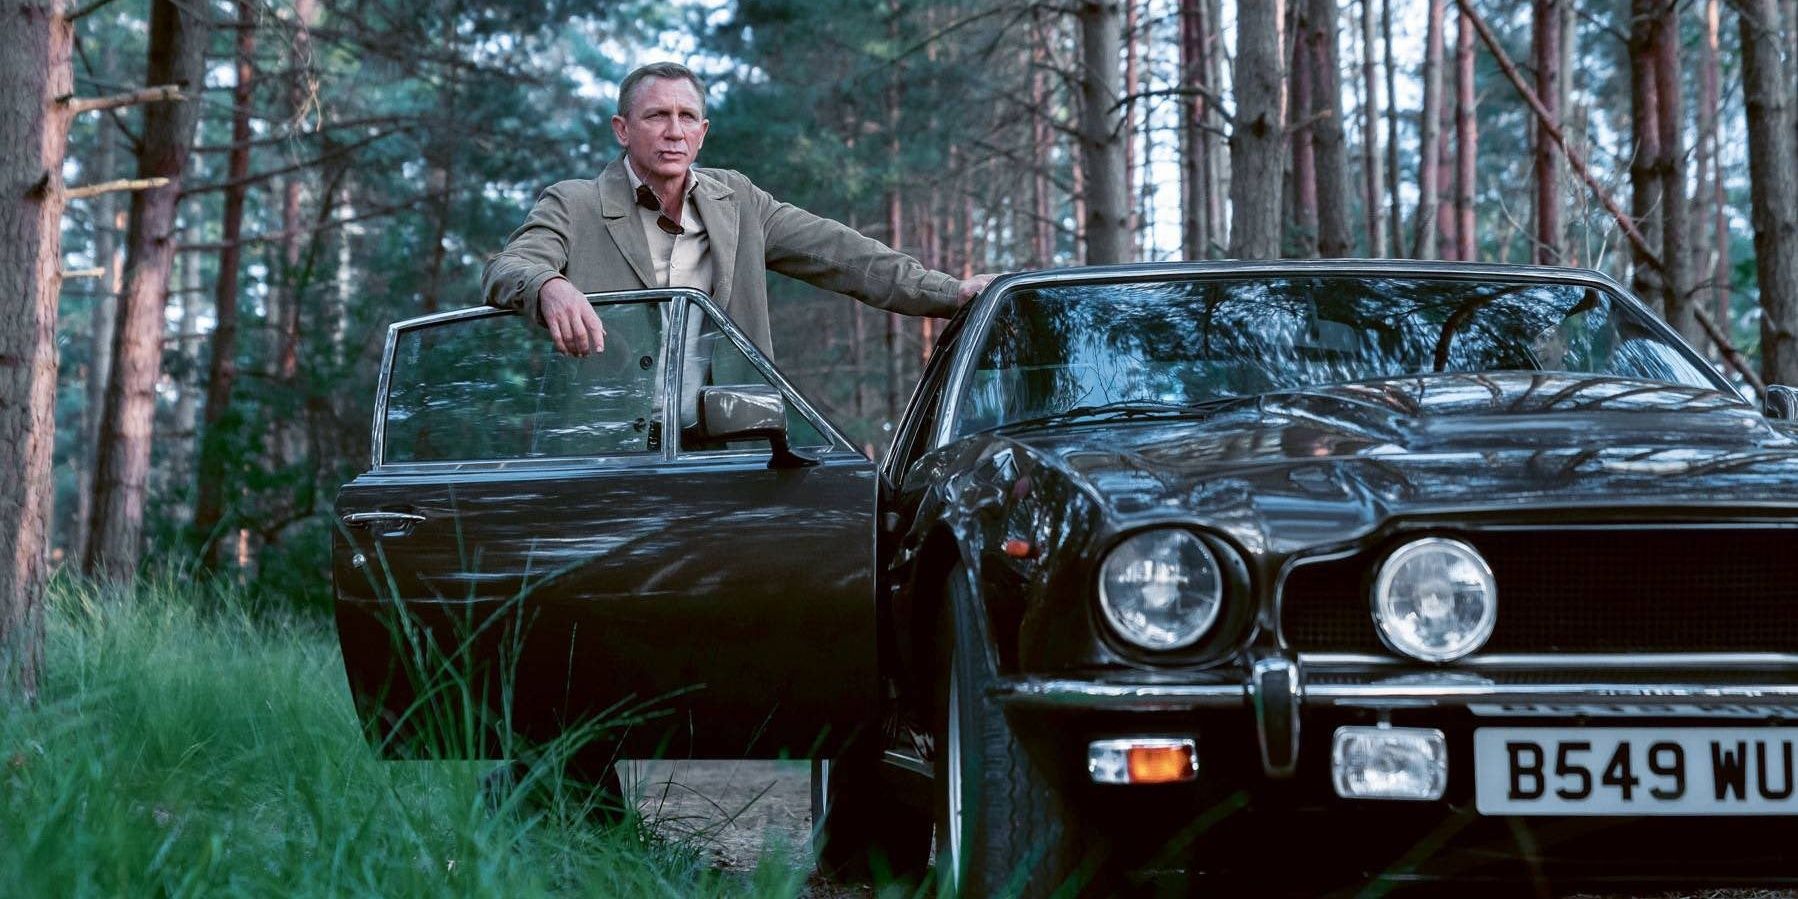 Bond steps out of his Aston Martin V8 Vantage in No Time To Die